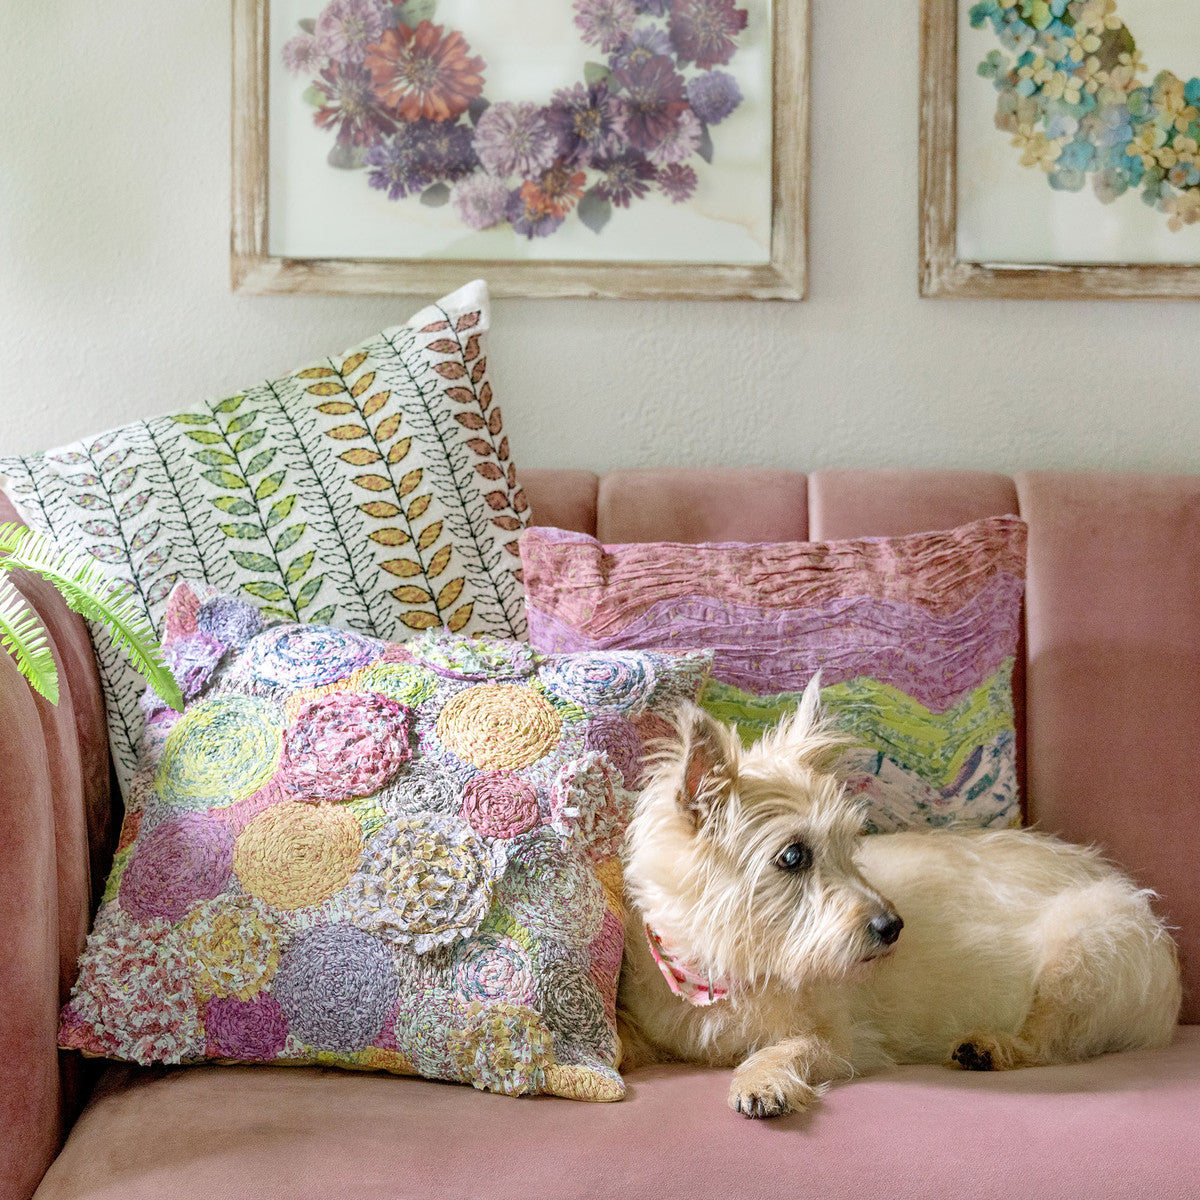 embroidered-vine-pattern-throw-pillow-on-couch-with-dog